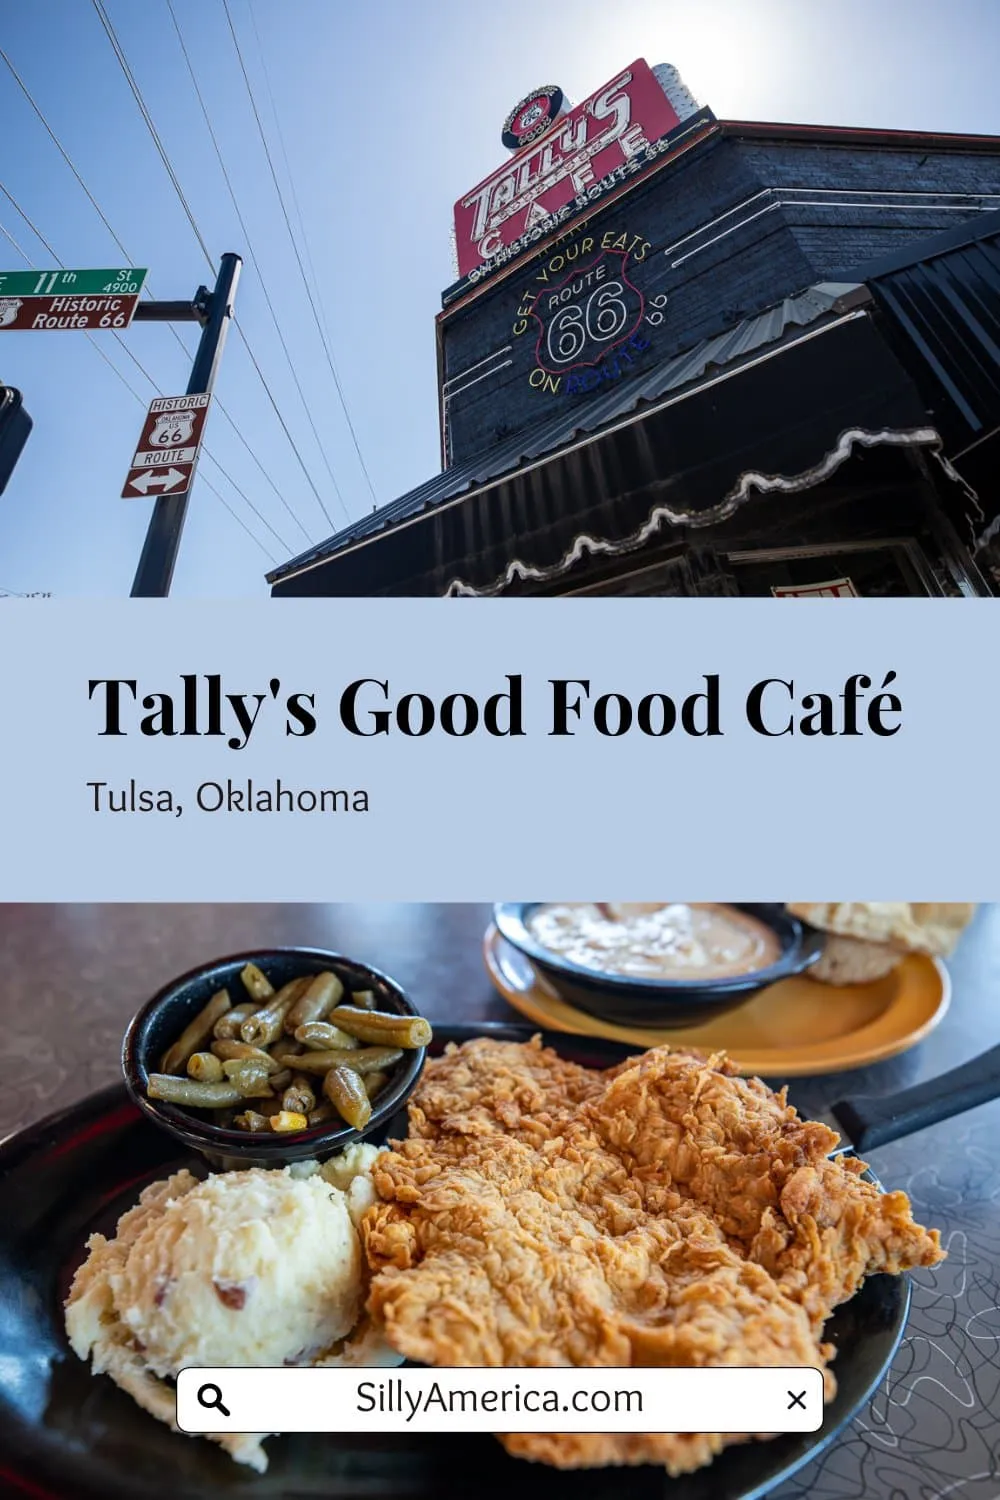 Get your eats on Route 66! Tally's Good Food Café in Tulsa, Oklahoma is a classic American diner located on the most classic road in America. Stop at this classic Route 66 diner for giant cinnamon rolls or chicken fried steak. Add this stop to your road trip itinerary for Tulsa, Oklahoma or Route 66! #Restaurant #RoadTrip #RoadTripStop #ClassicDiner #Route66 #OklahomaRoadTrip #Tulsa #TulsaOklahoma